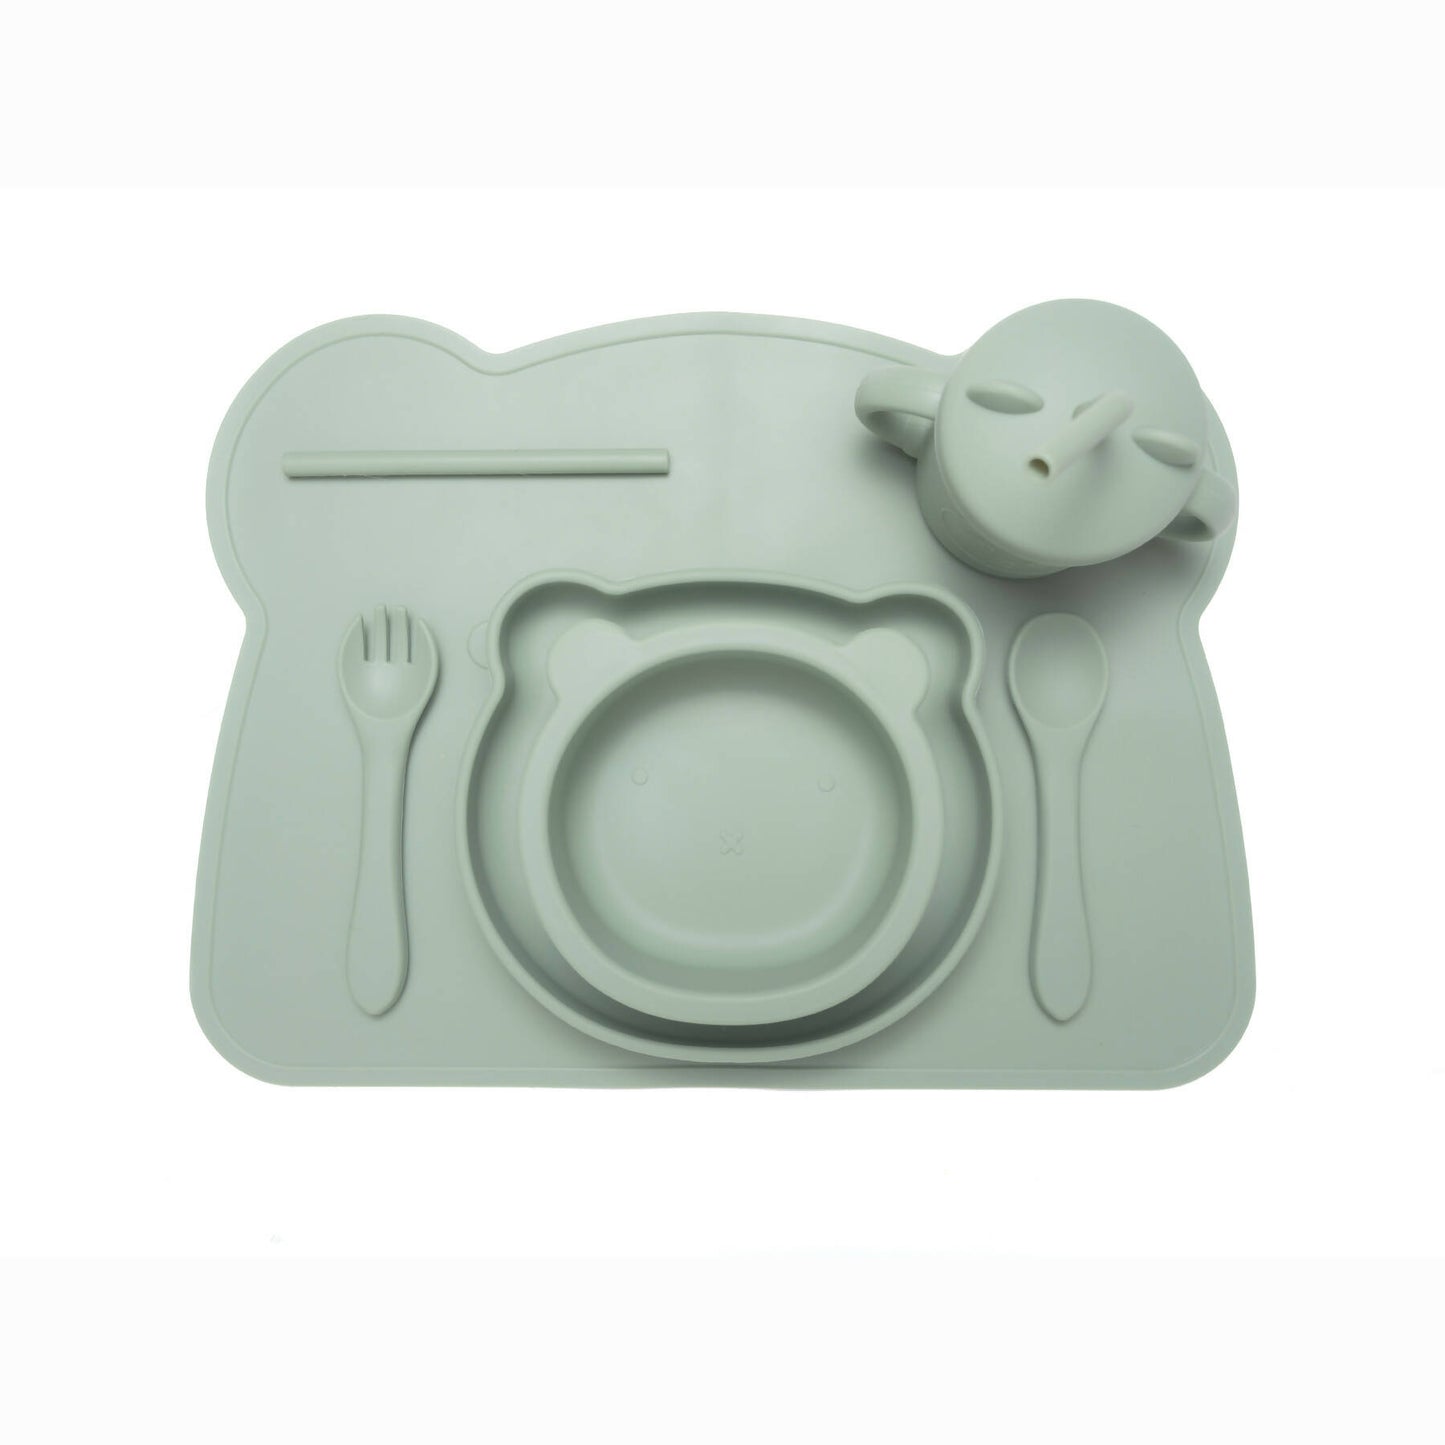 Little Bear Silicone Baby & Toddler Feeding/ Weaning Set